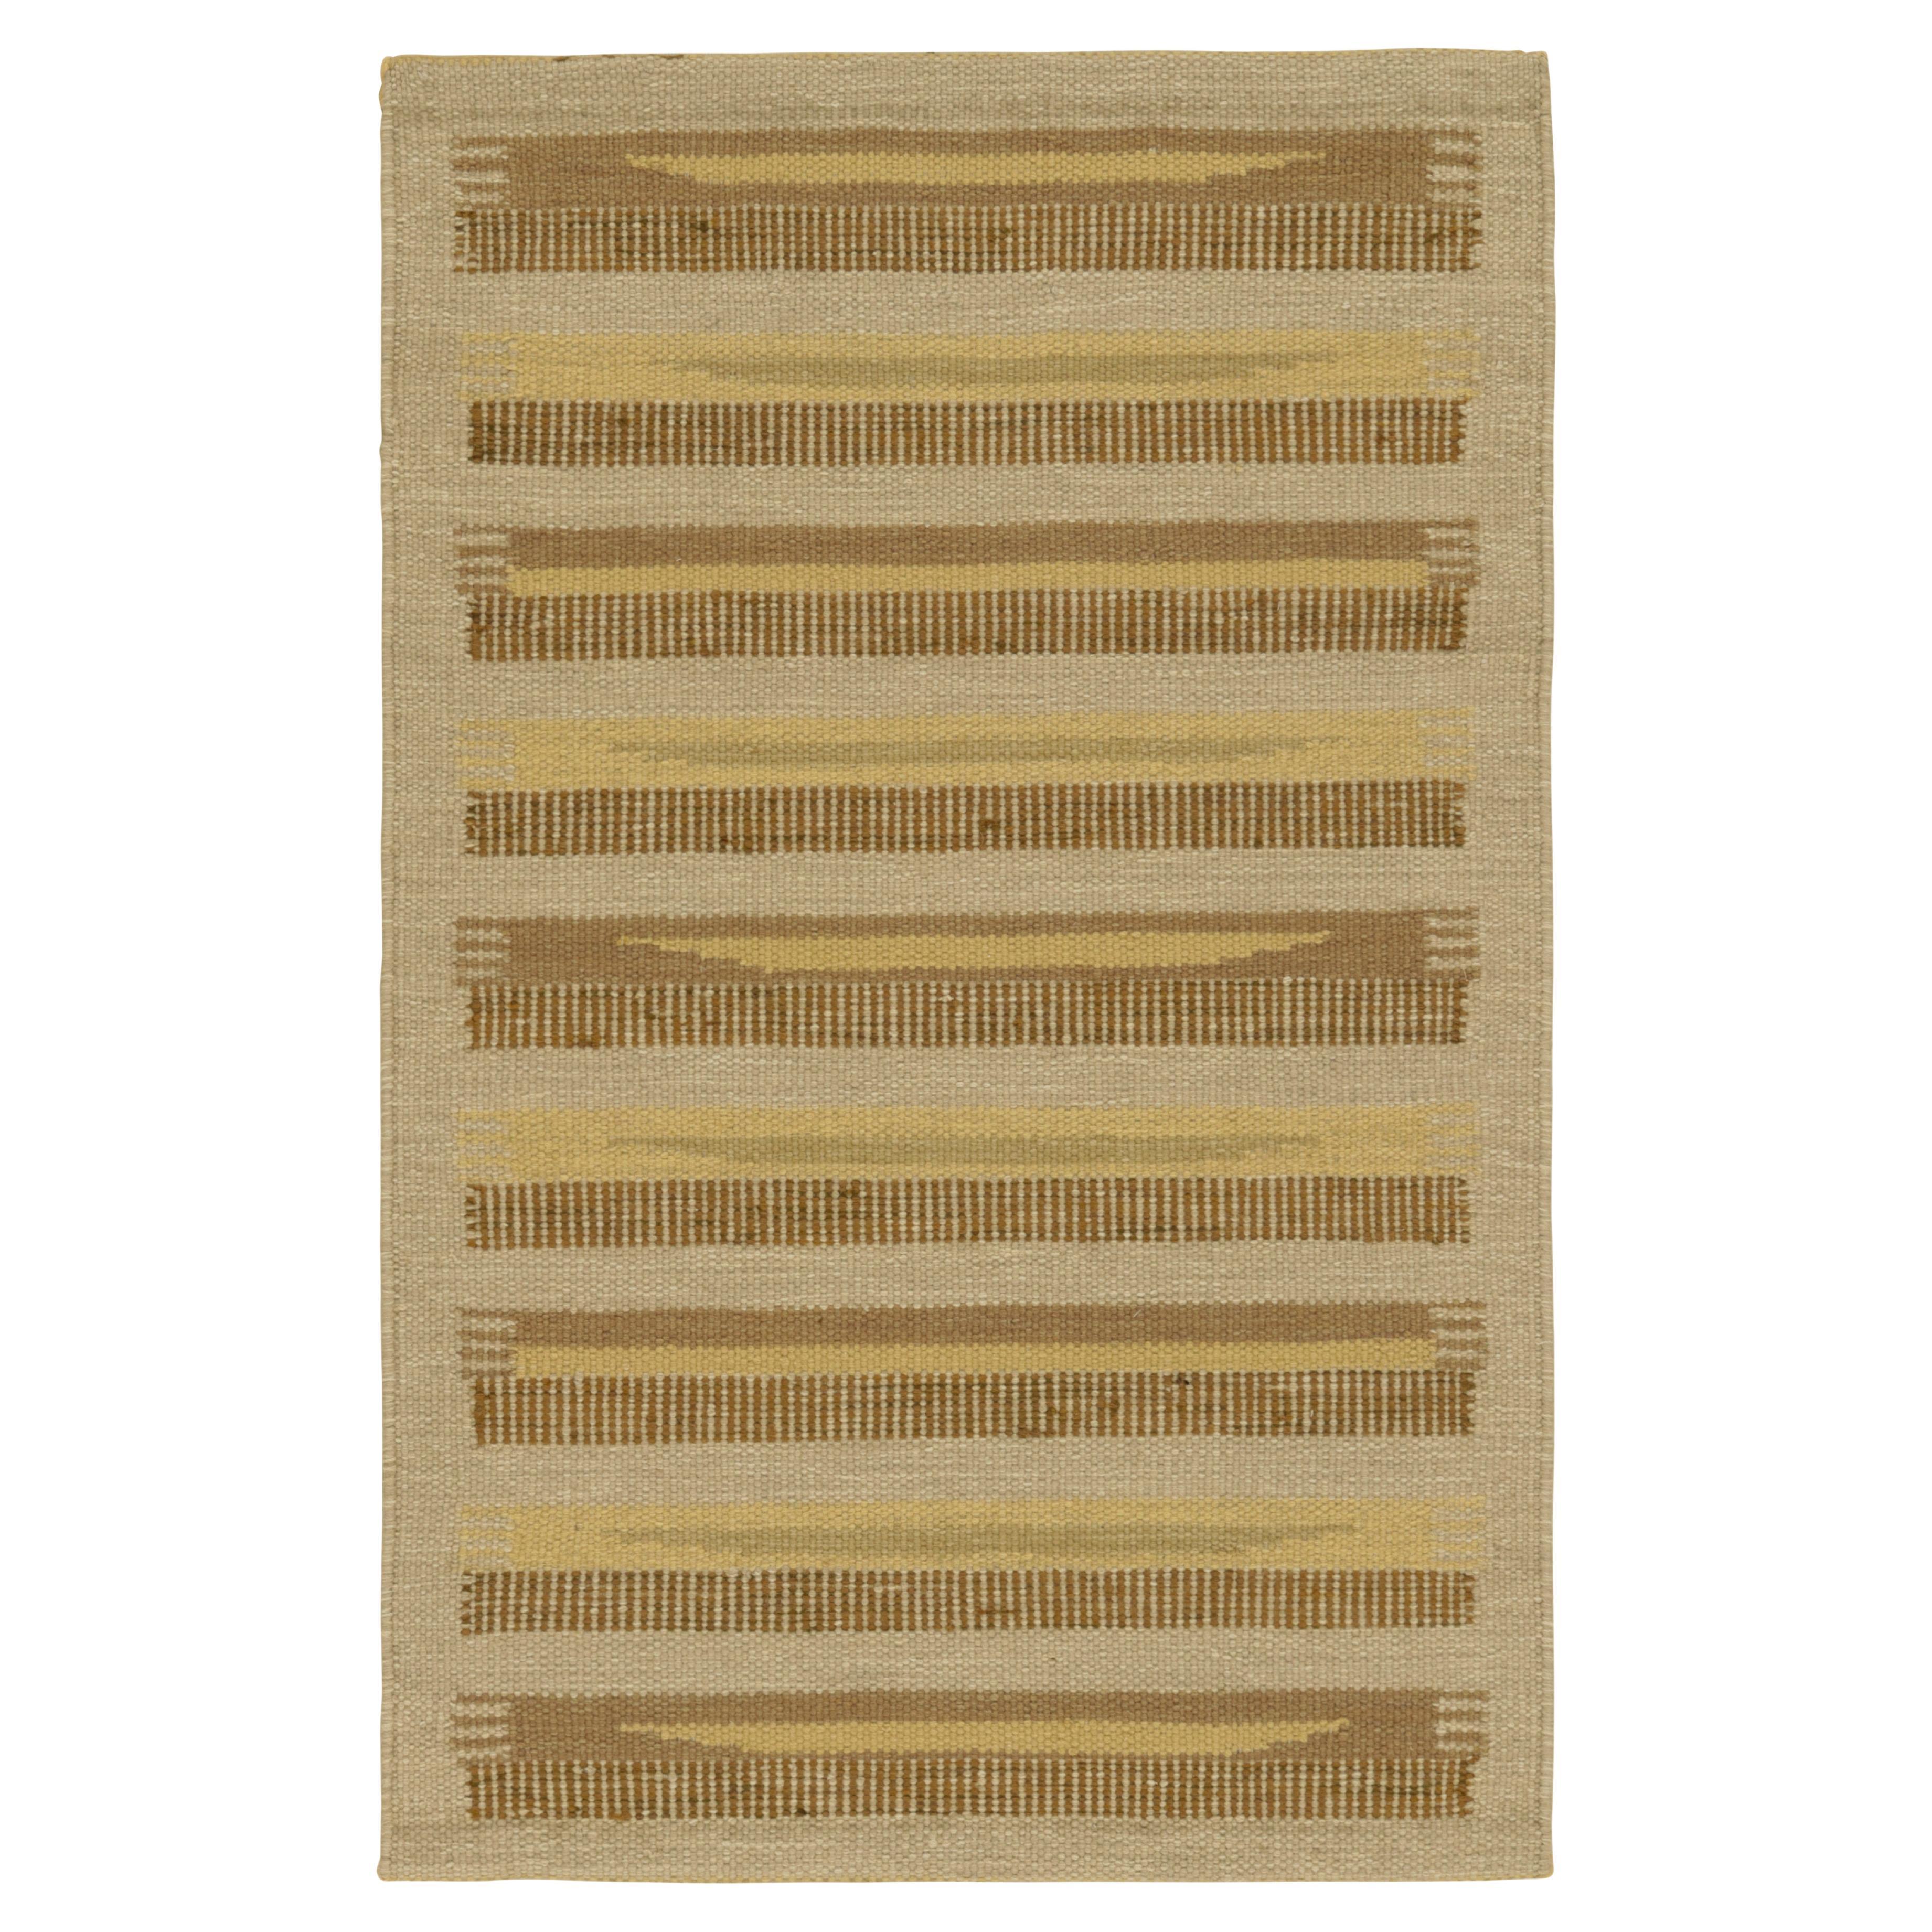 Rug & Kilim’s Scandinavian Style Rug in Beige, with Brown and Gold Stripes